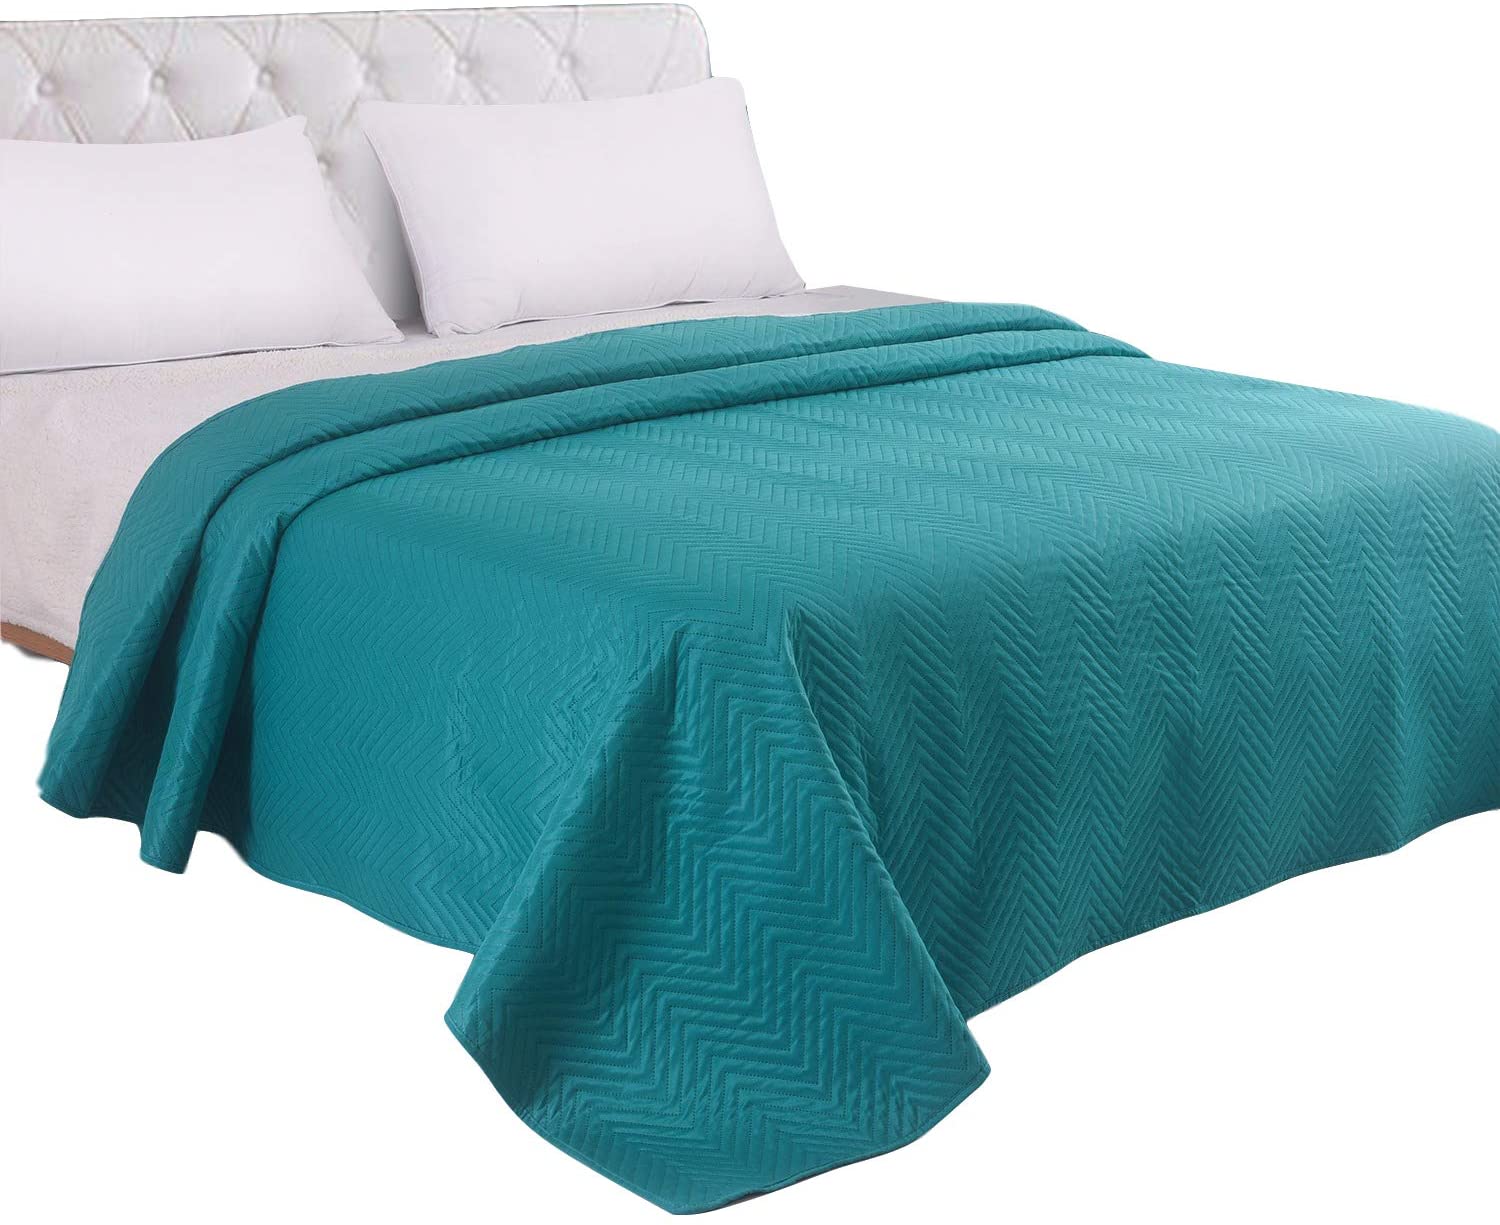 Coverlet Checkered Soli Details about   LITHER Bedspreads Twin Size Lightweight Oversized Quilt 